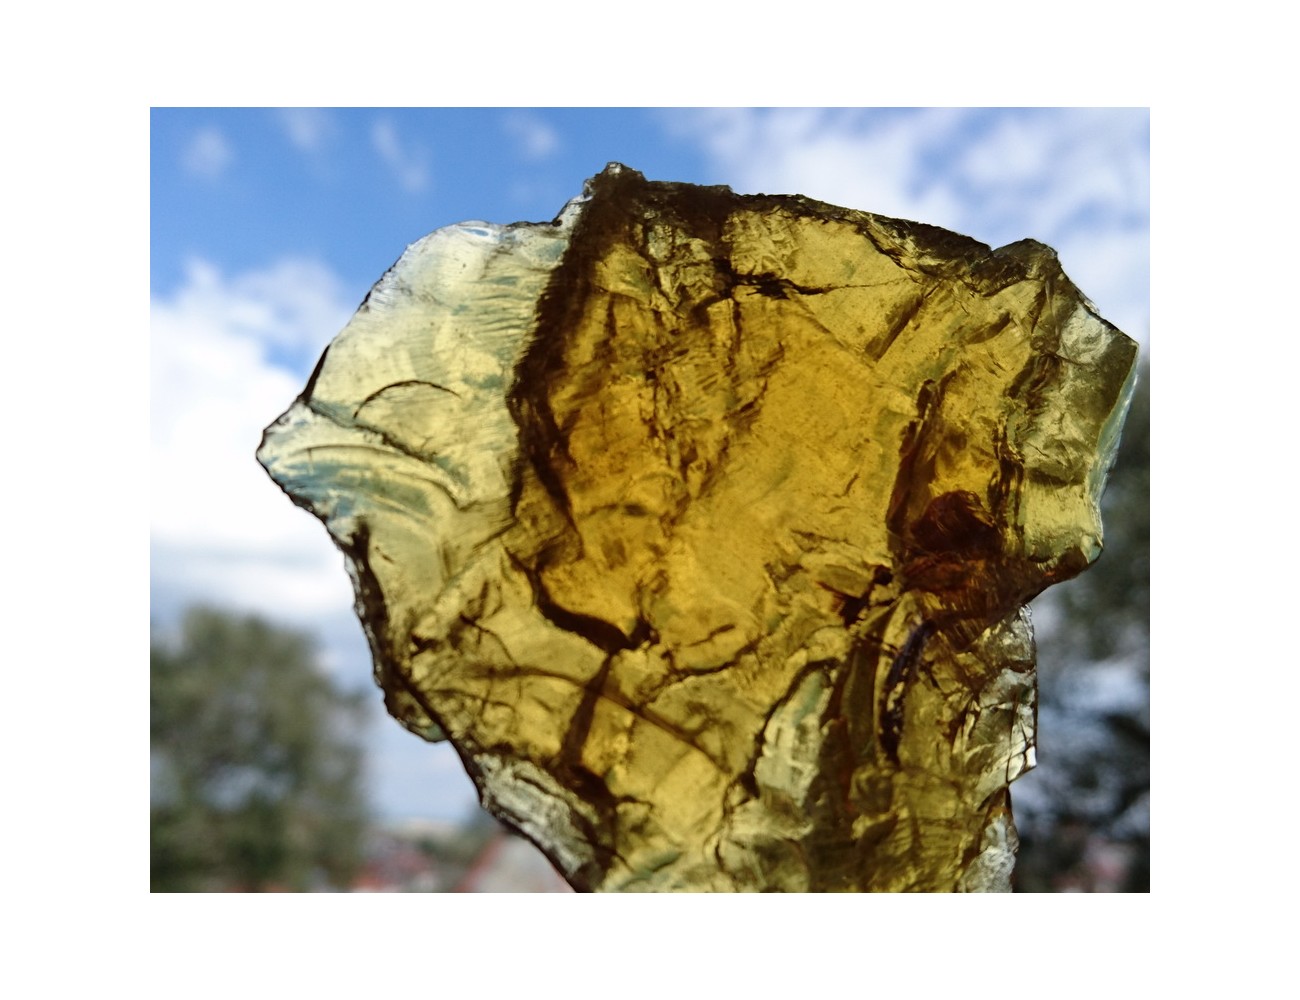 Pine Rosin - Tree Resin for Making Beeswax Food Wraps, Food Grade Pine Resin  Natural Hand Grip Enhancer Gum Nugget Rock Form - Buy Online - 169006379